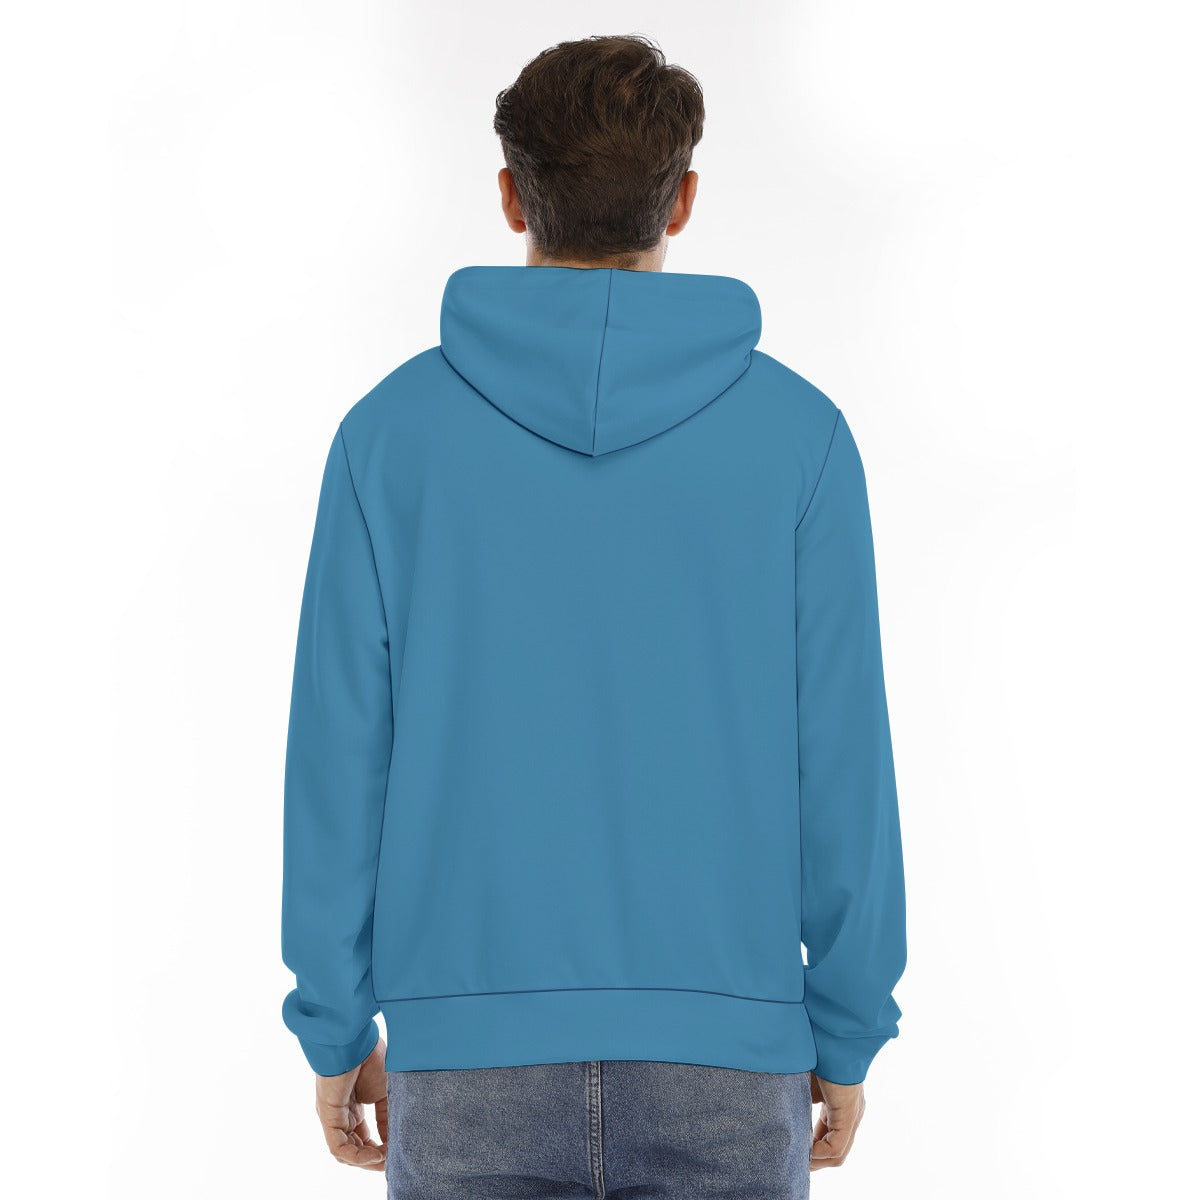 All-Over Print Men's Hoodie With Placket Double Zipper